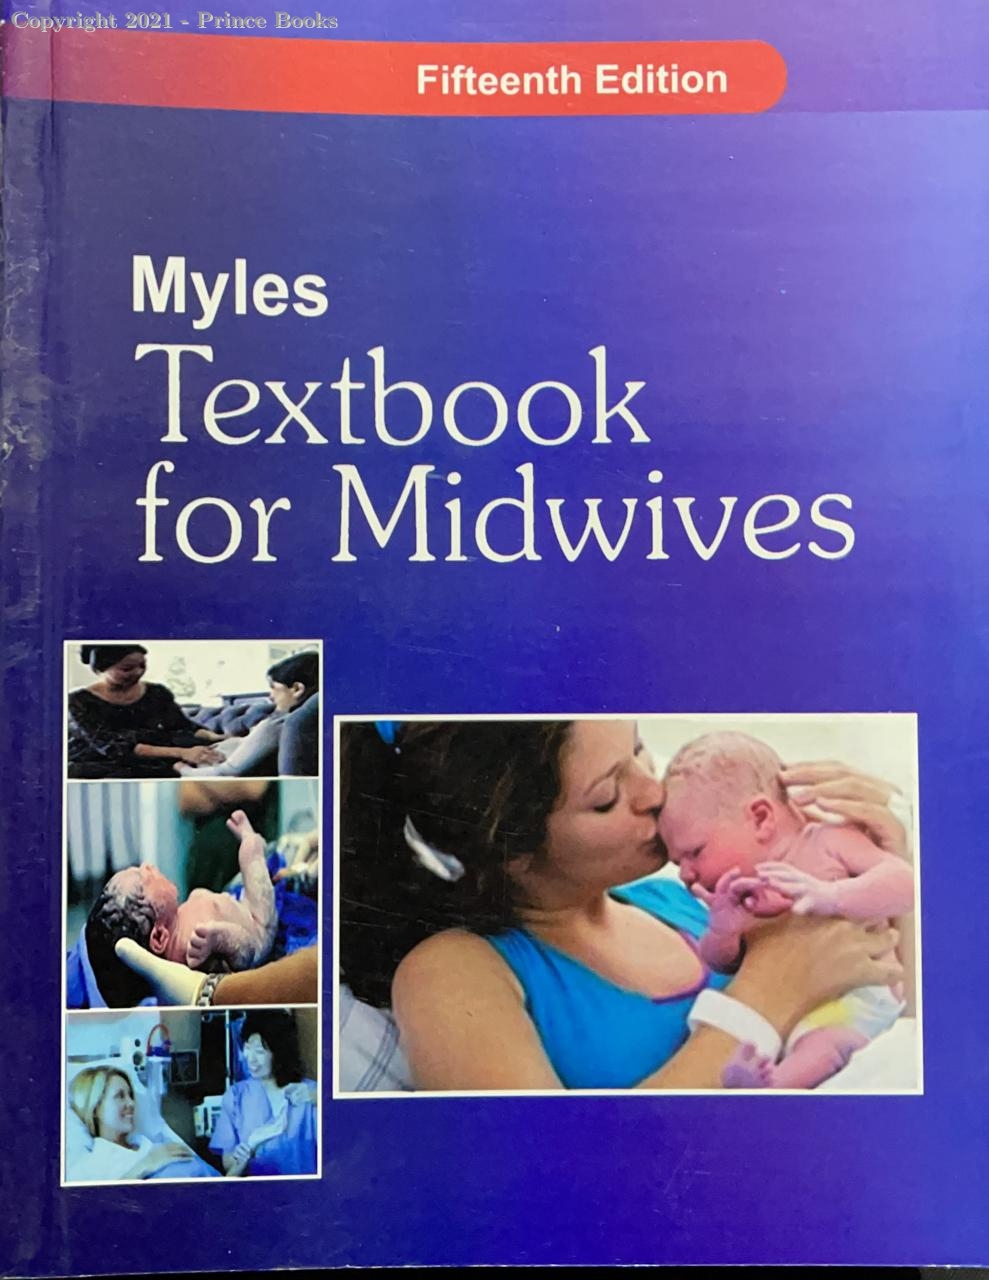 Myles Textbook for Midwives, 15e